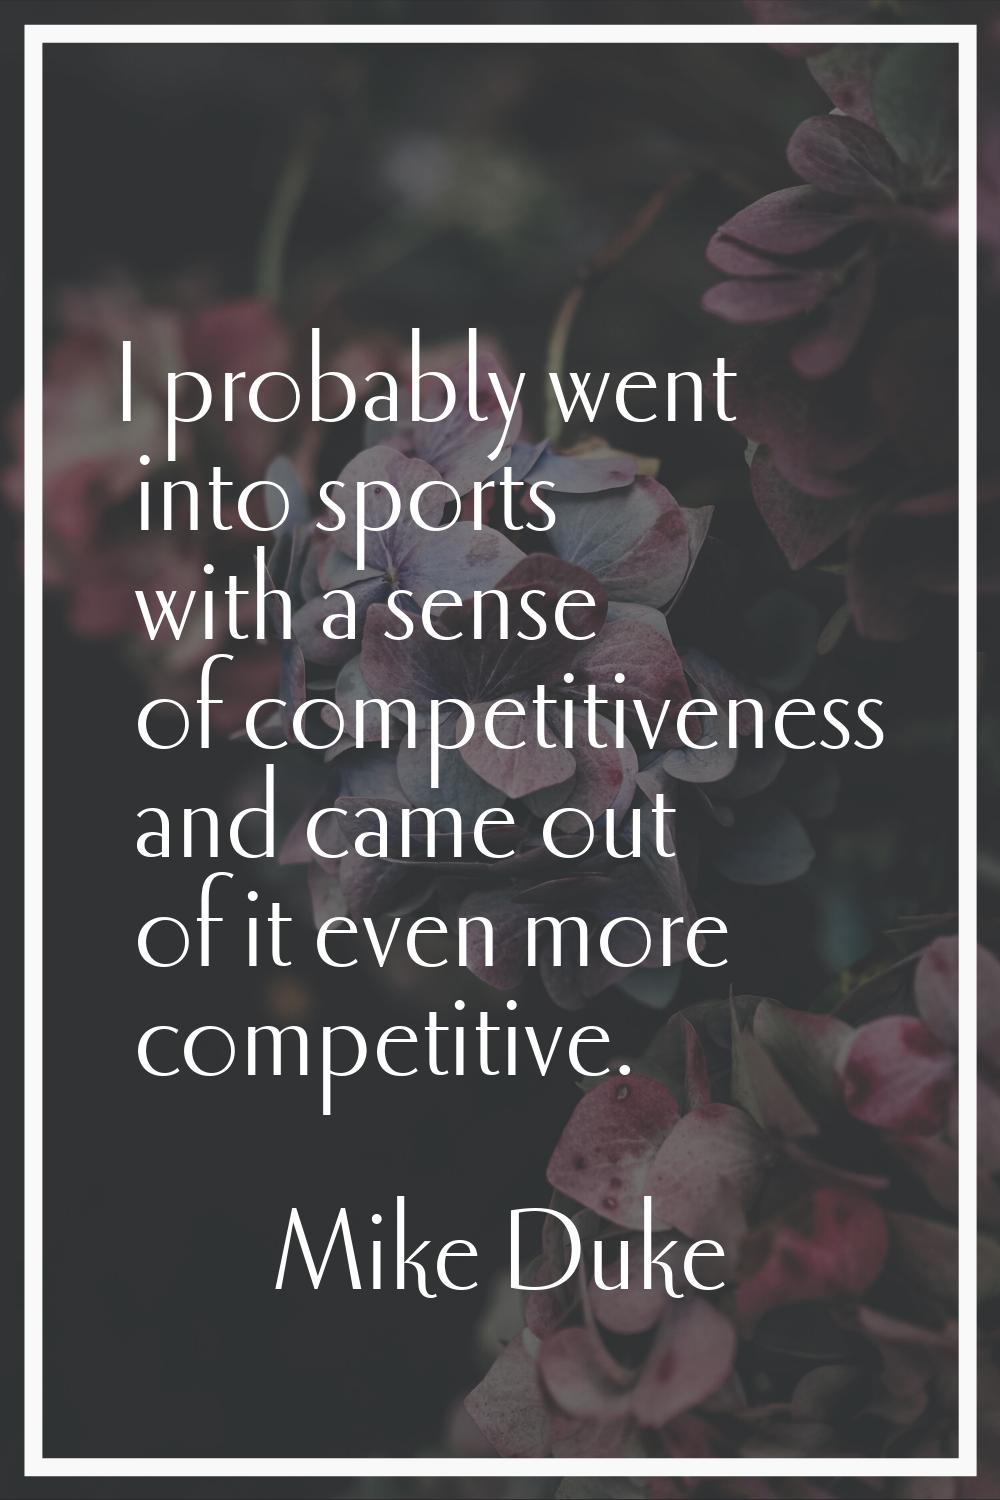 I probably went into sports with a sense of competitiveness and came out of it even more competitiv